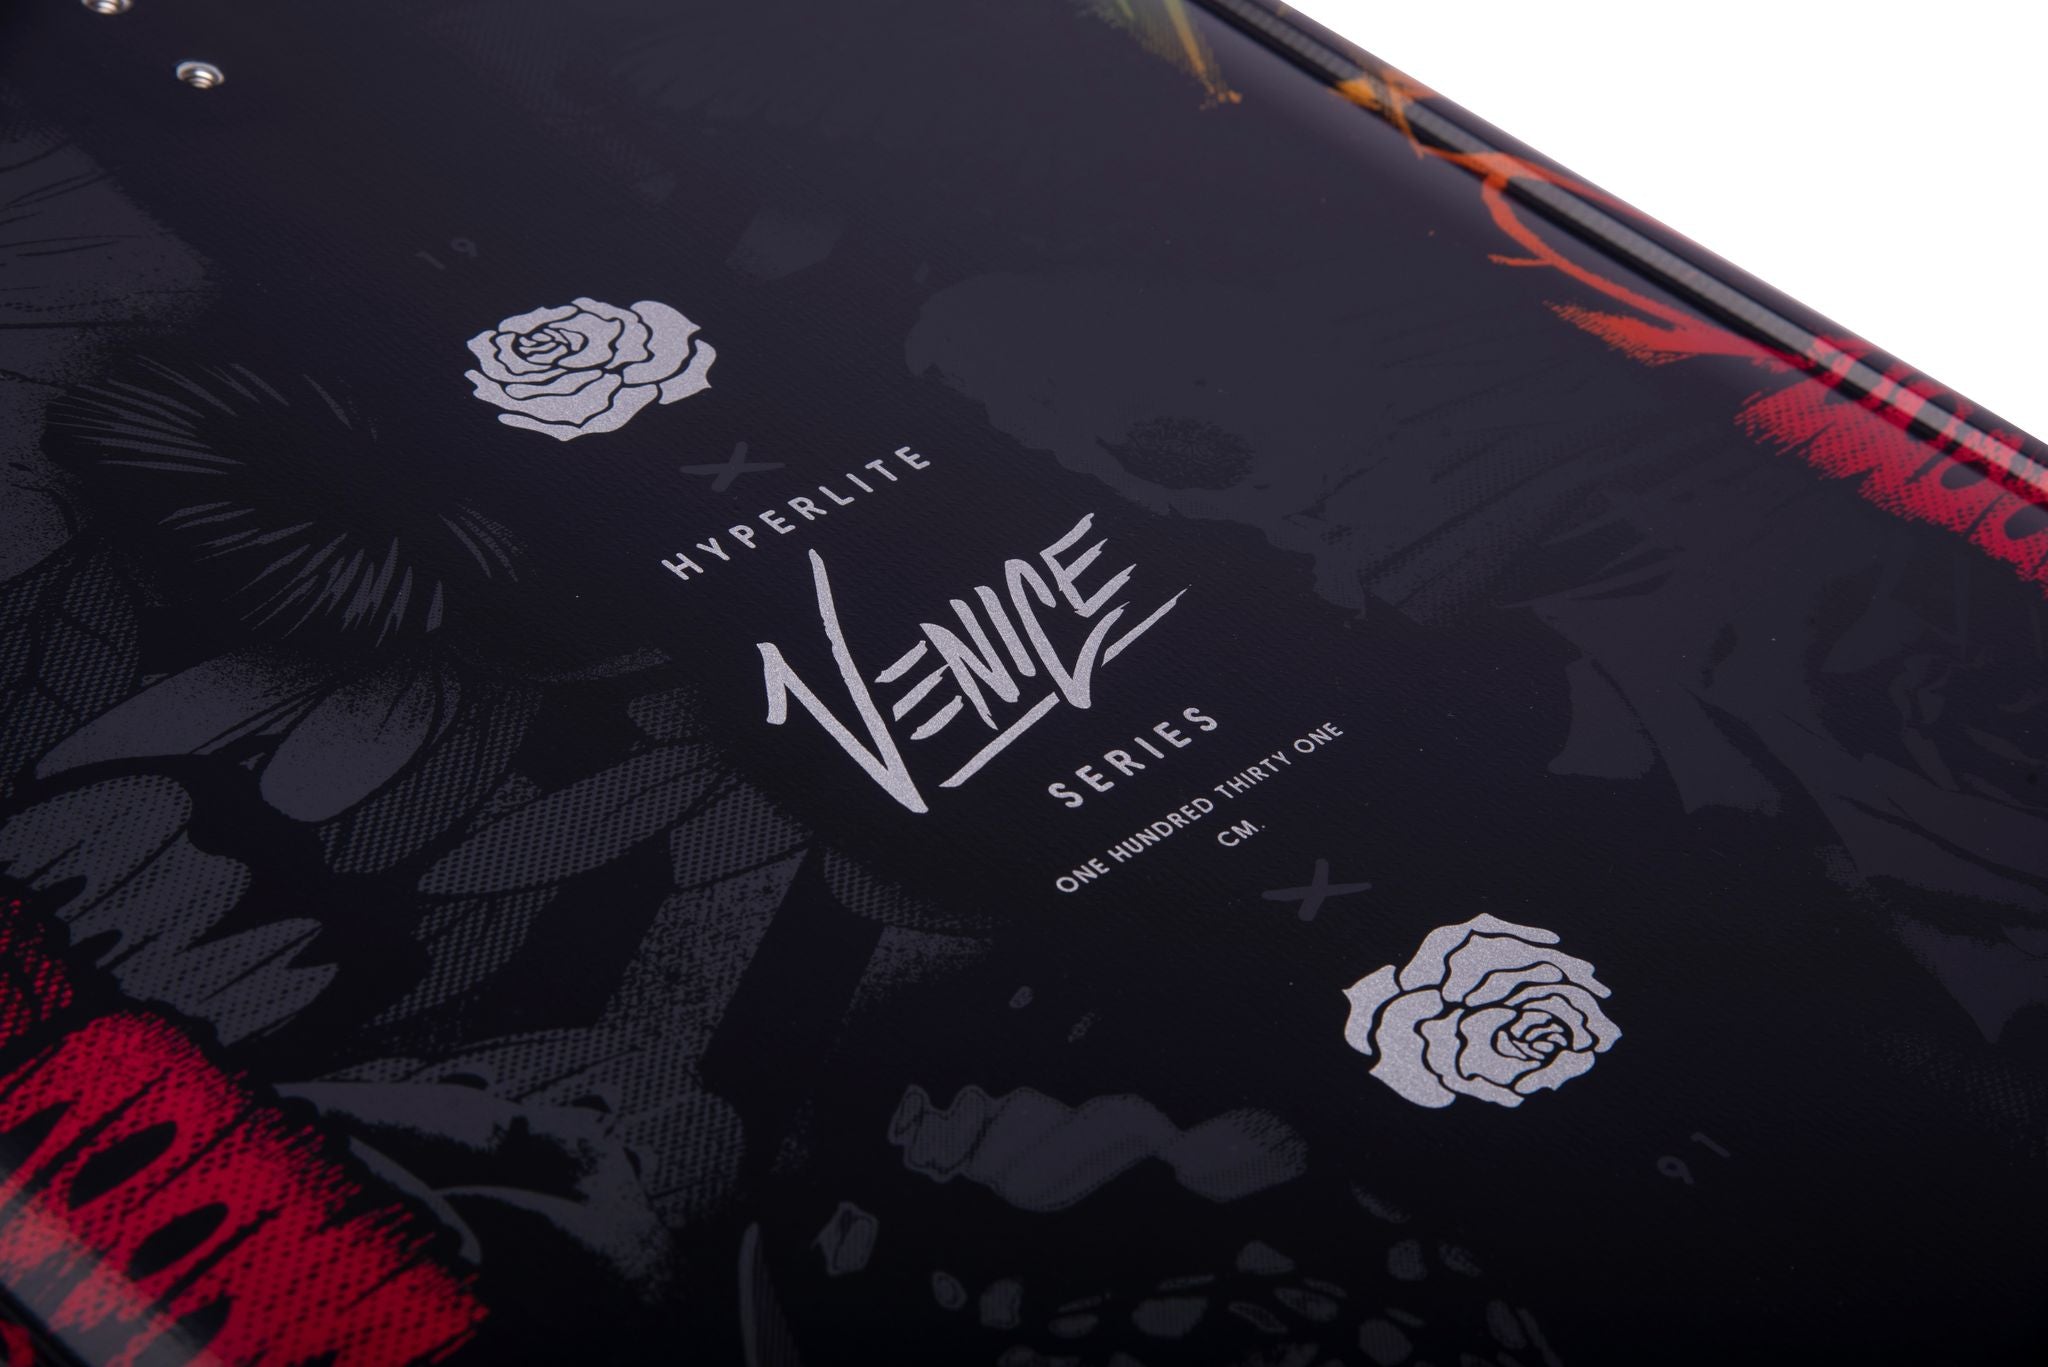 The back of a Hyperlite 2023 Venice Wakeboard featuring a floral design inspired by Shaun Murray's Venice Hyperlite model.